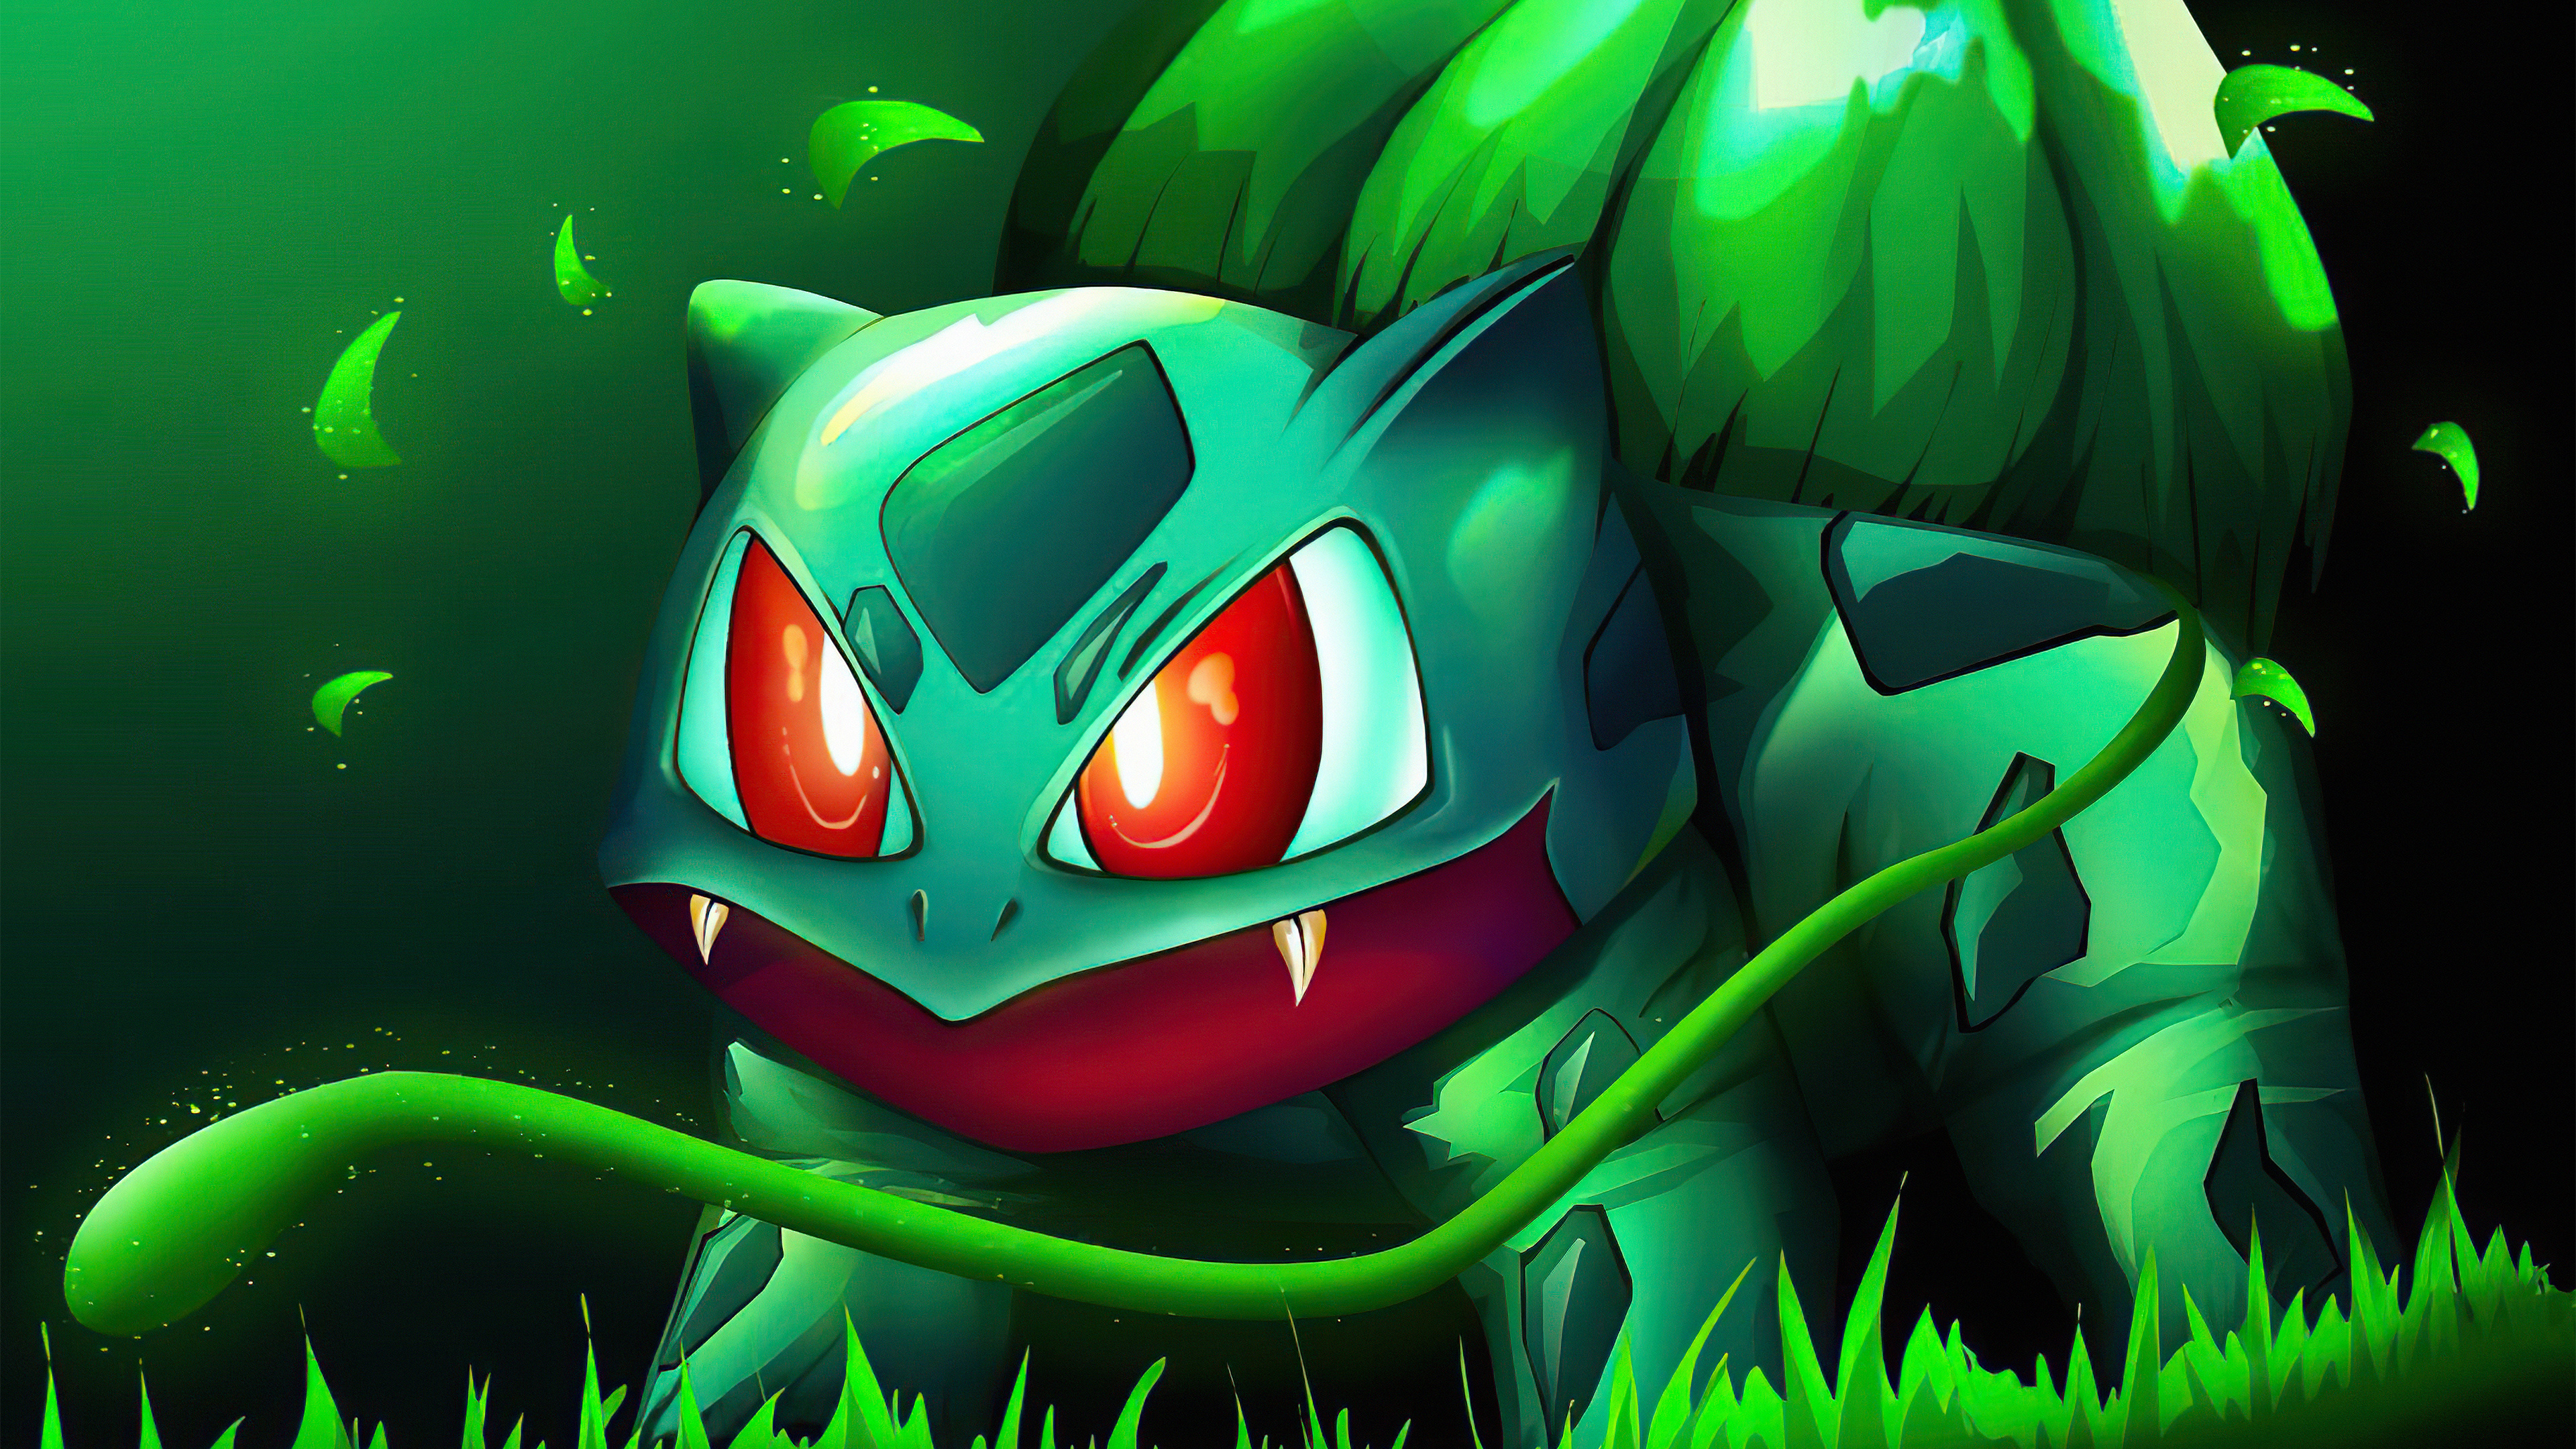 Grass (Pokemon): Bulbasaur, A Poison type, Introduced in Generation 1, The bulb on its back stores an energy. 3840x2160 4K Wallpaper.